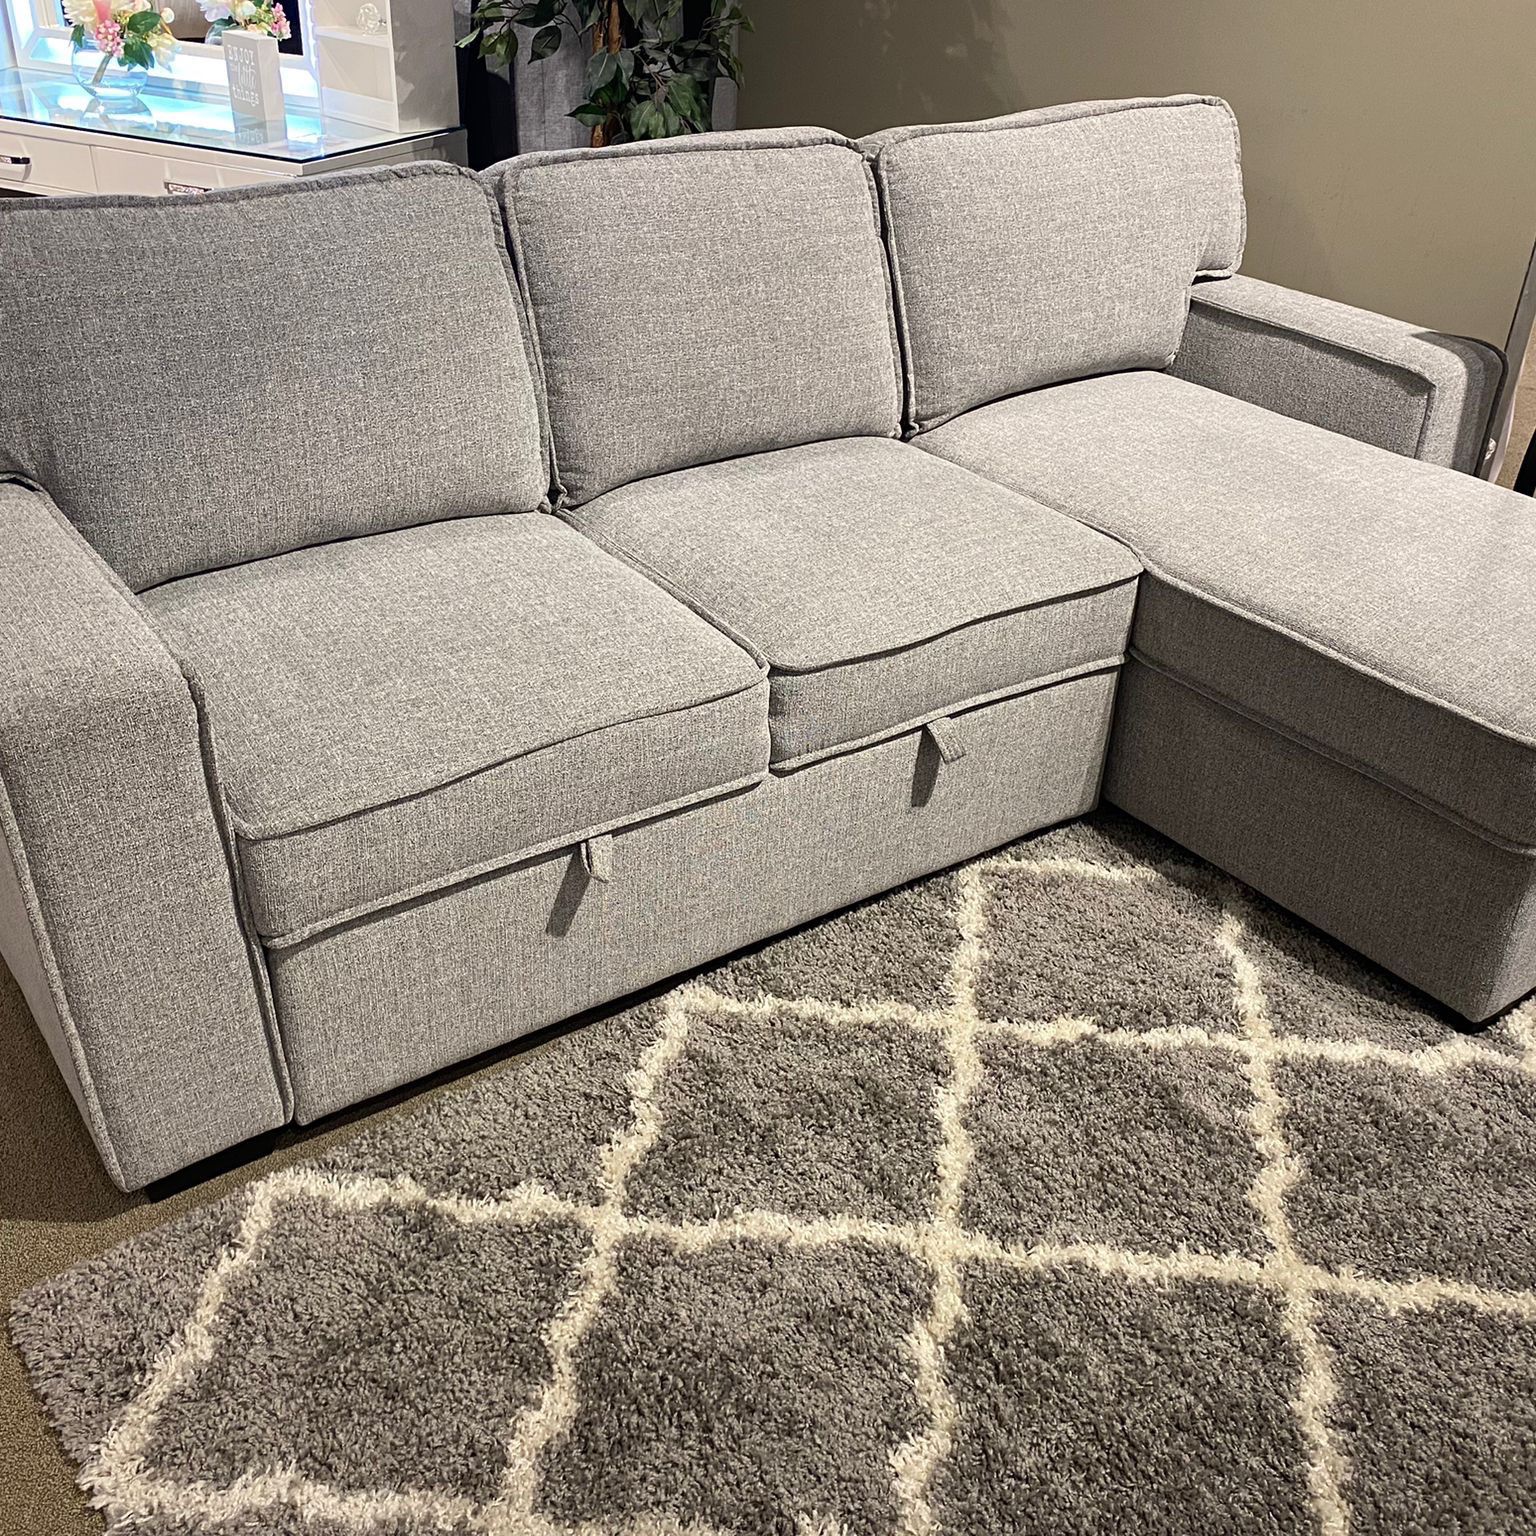 NEW OFFER!!✨✨Gray sleeper sofa sectional w/Reversible Chaise w/Storage✨